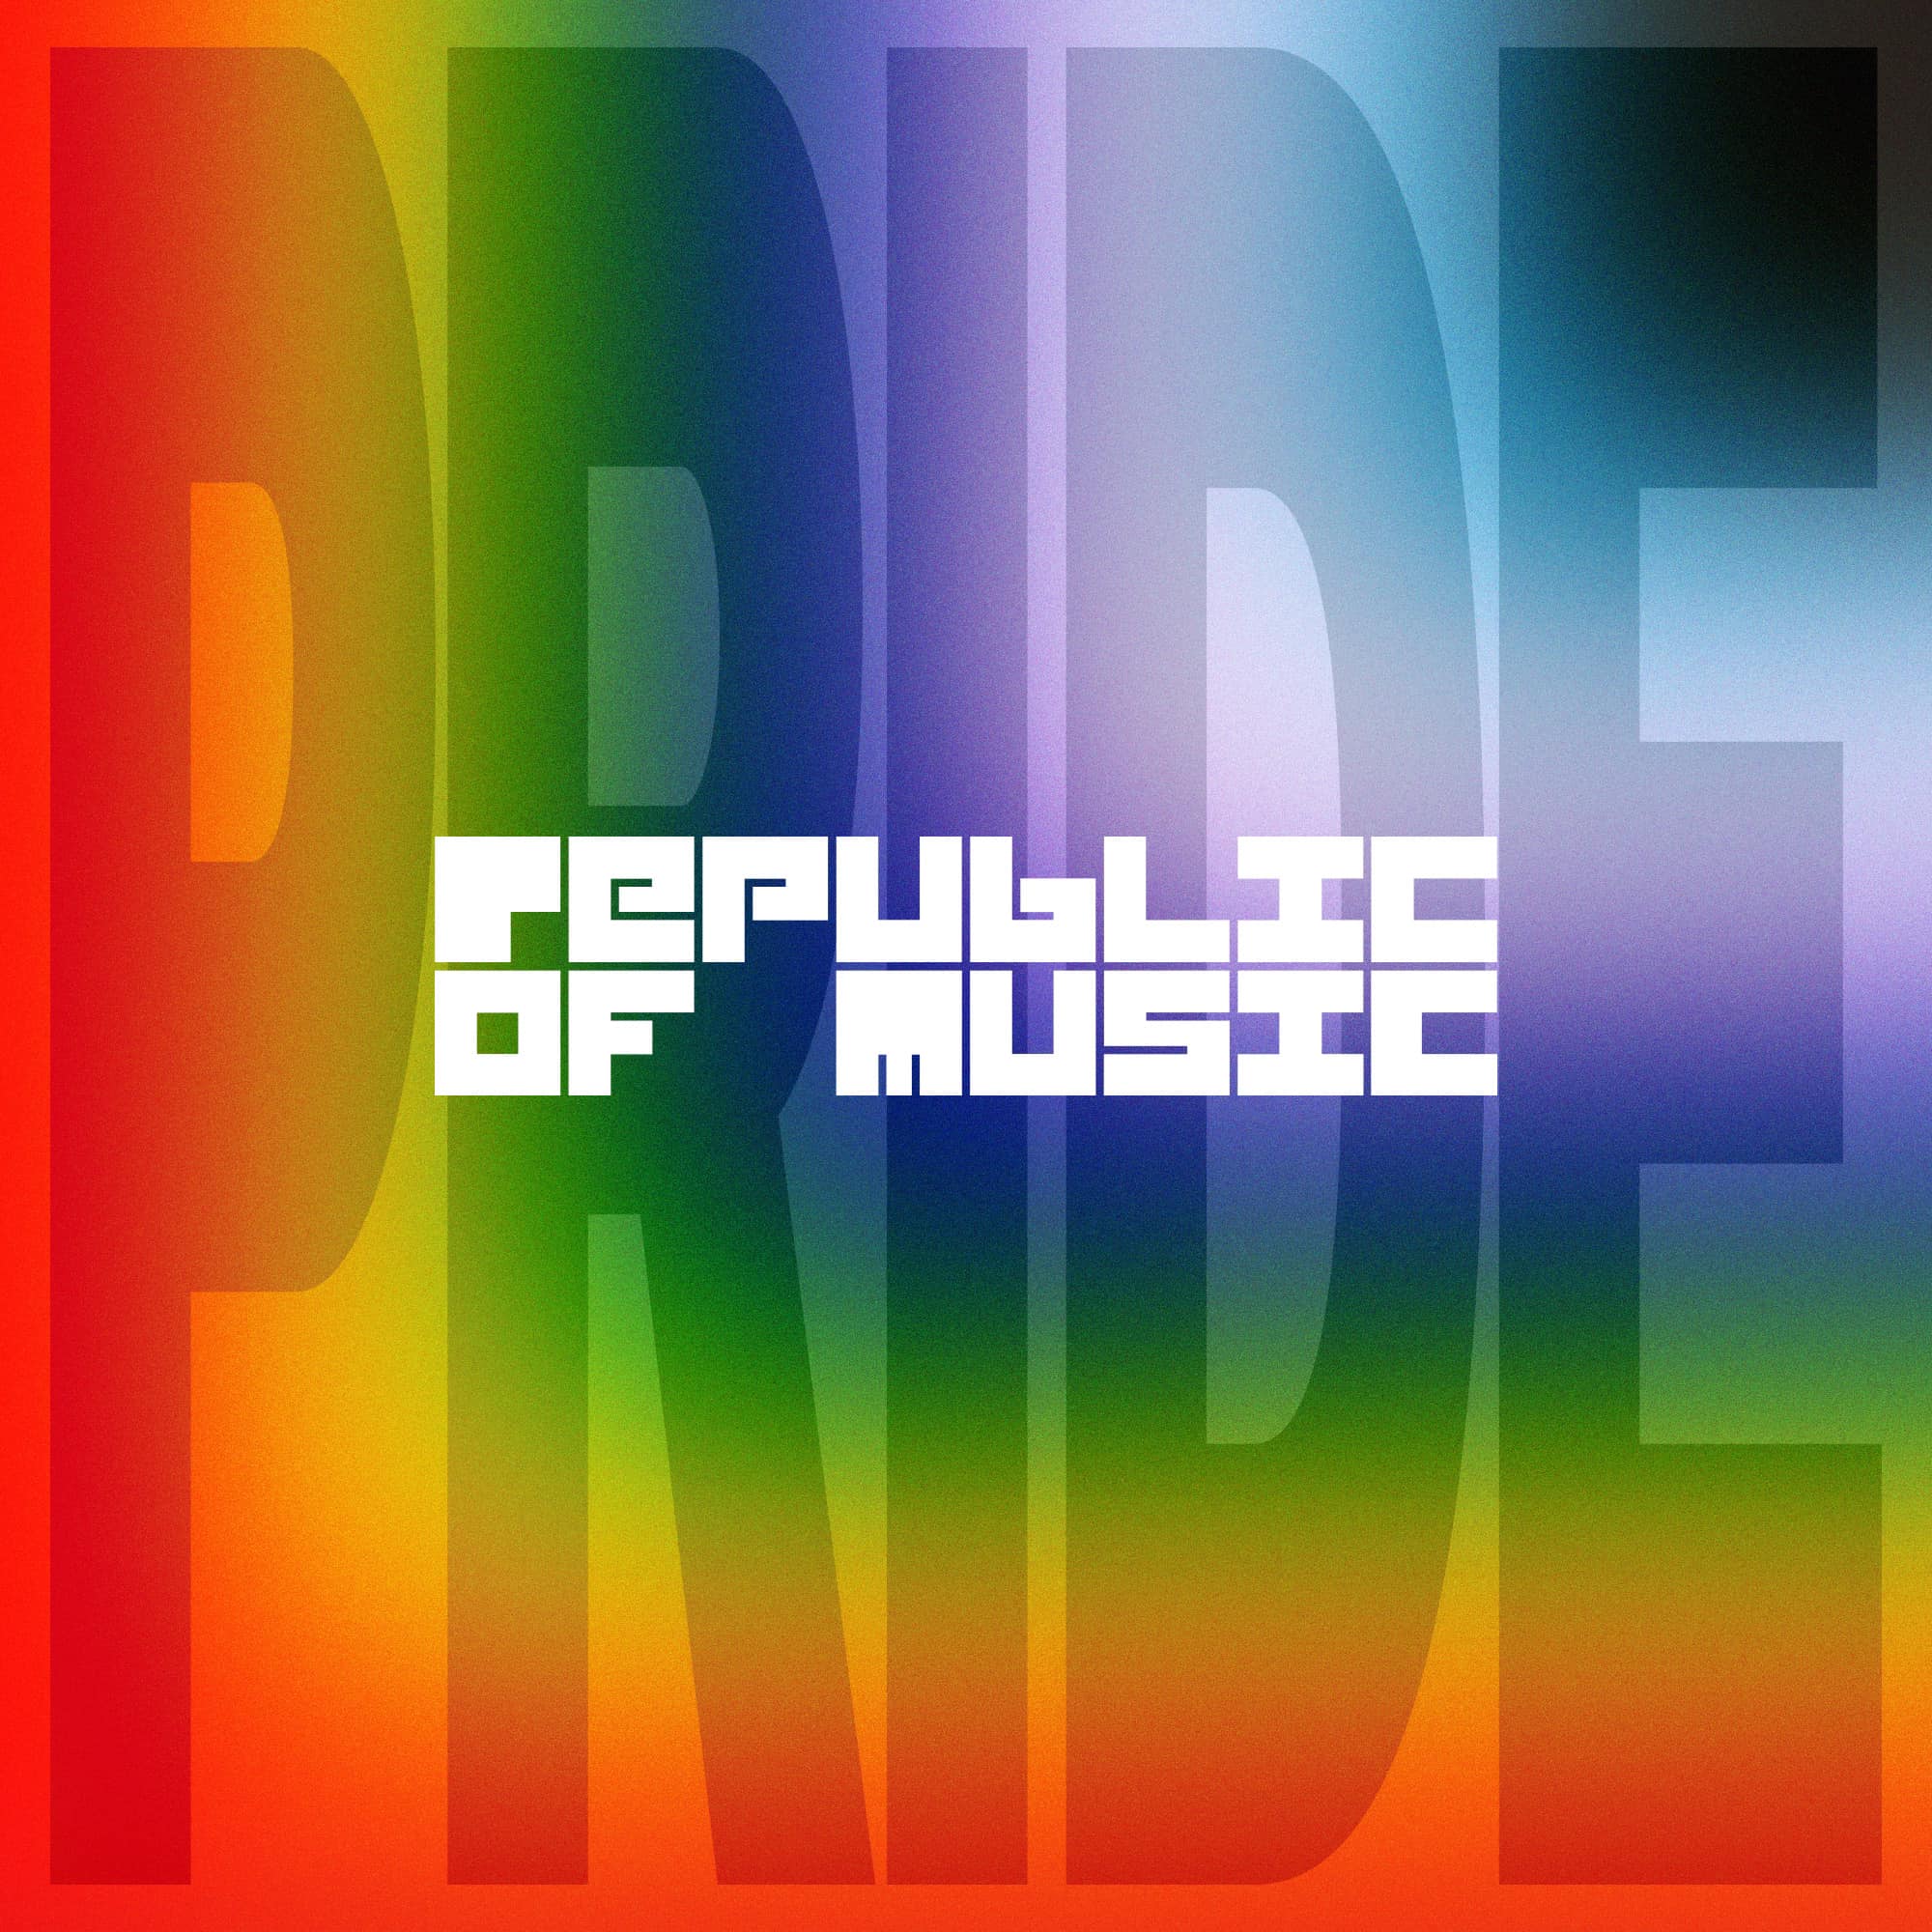 THANK YOU TO EVERYONE WHO PARTICIPATED IN OUR #PRIDEMONTH FUNDRAISER FOR Pride in Music